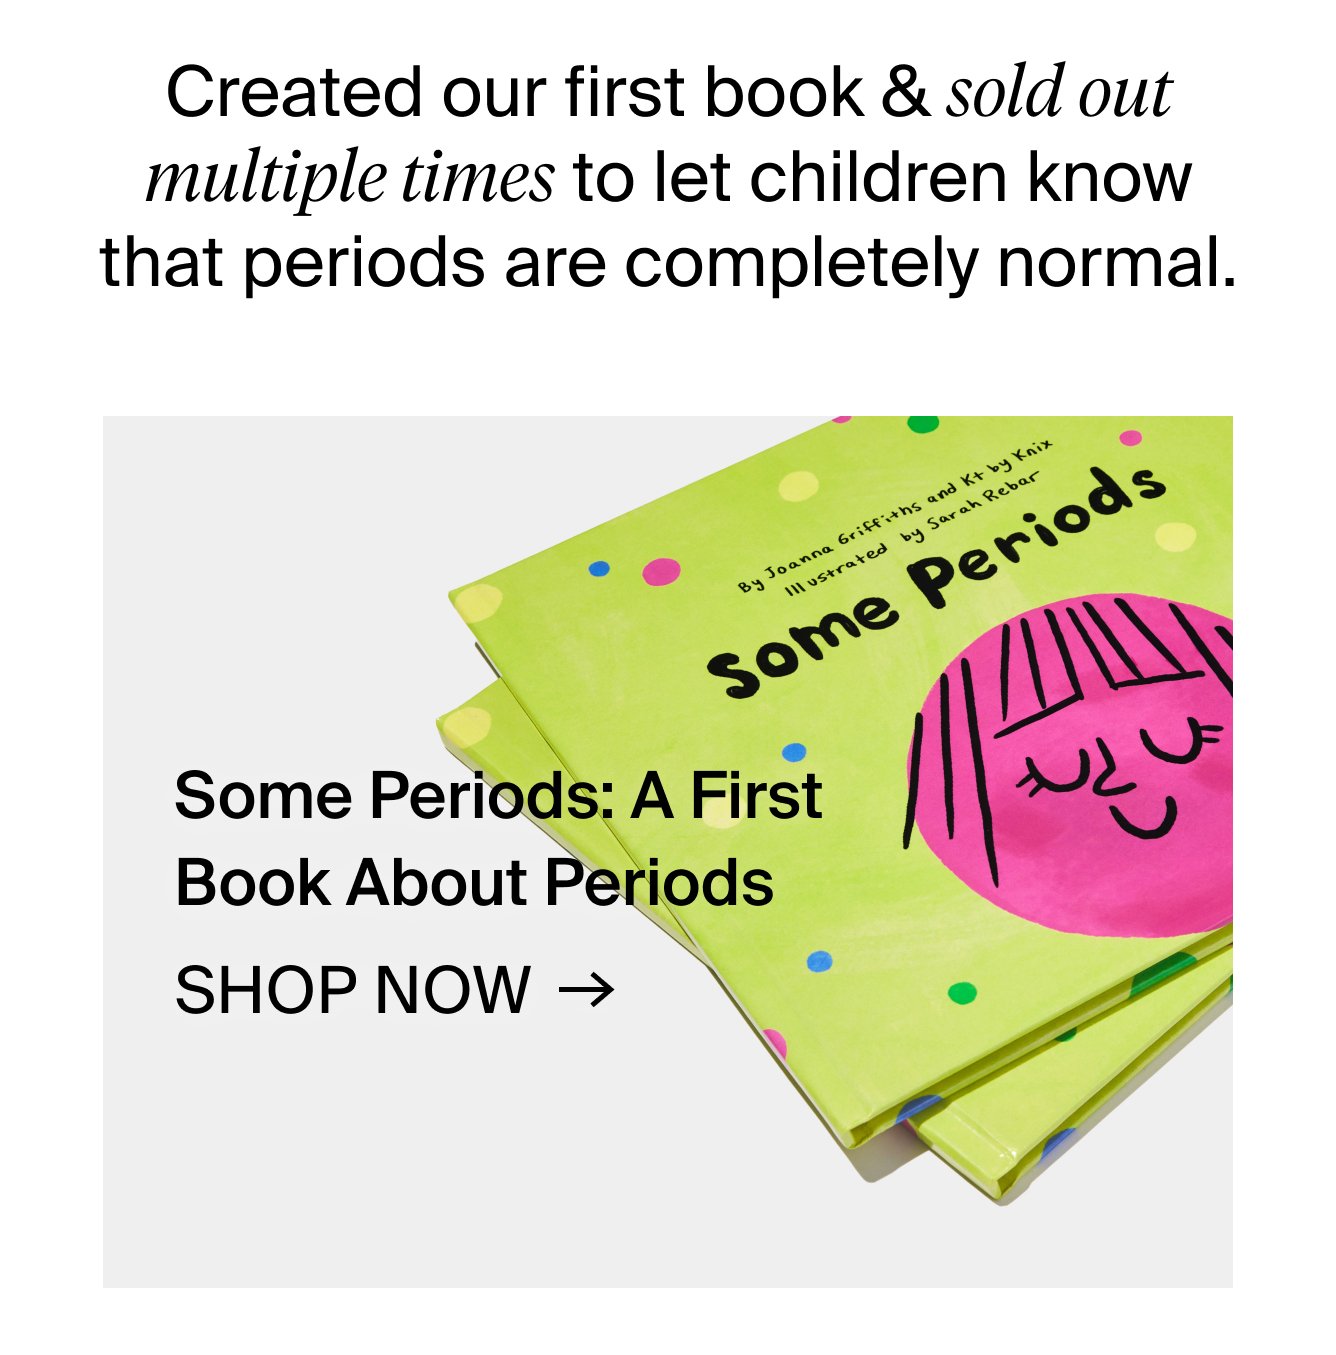 Created our first book & sold out multiple times to let children know that periods are completely normal. Some periods: A First Book About Periods. SHOP NOW.